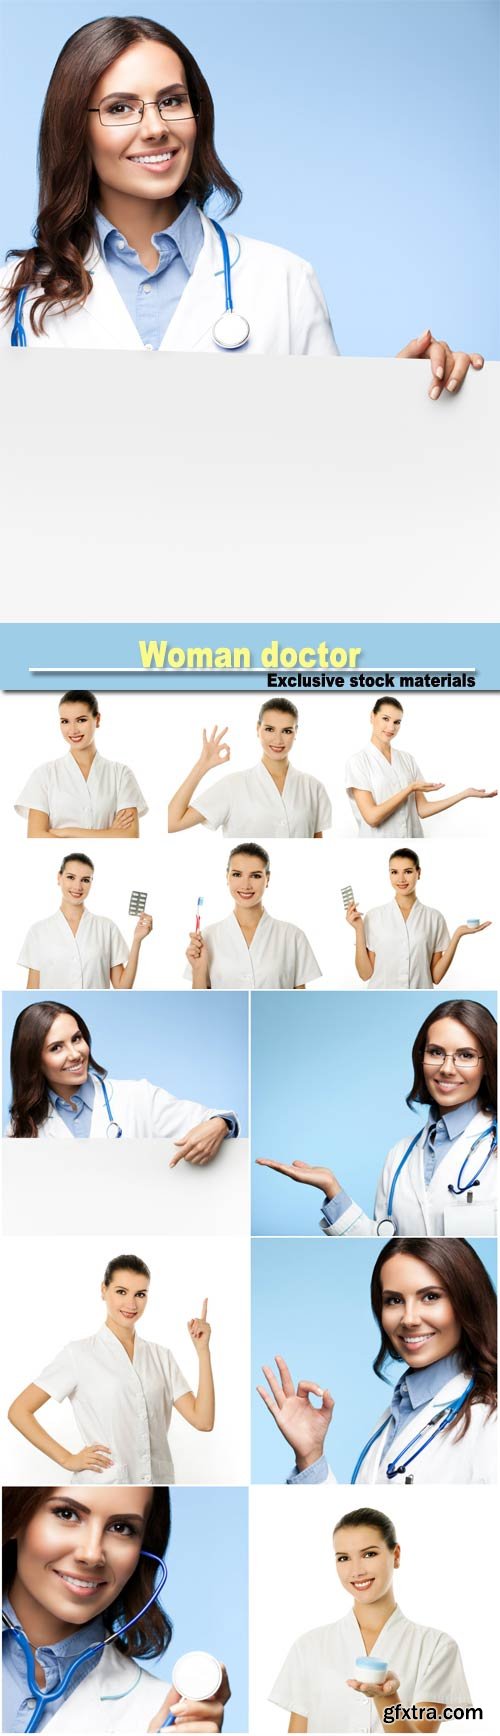 Woman doctor in different positions